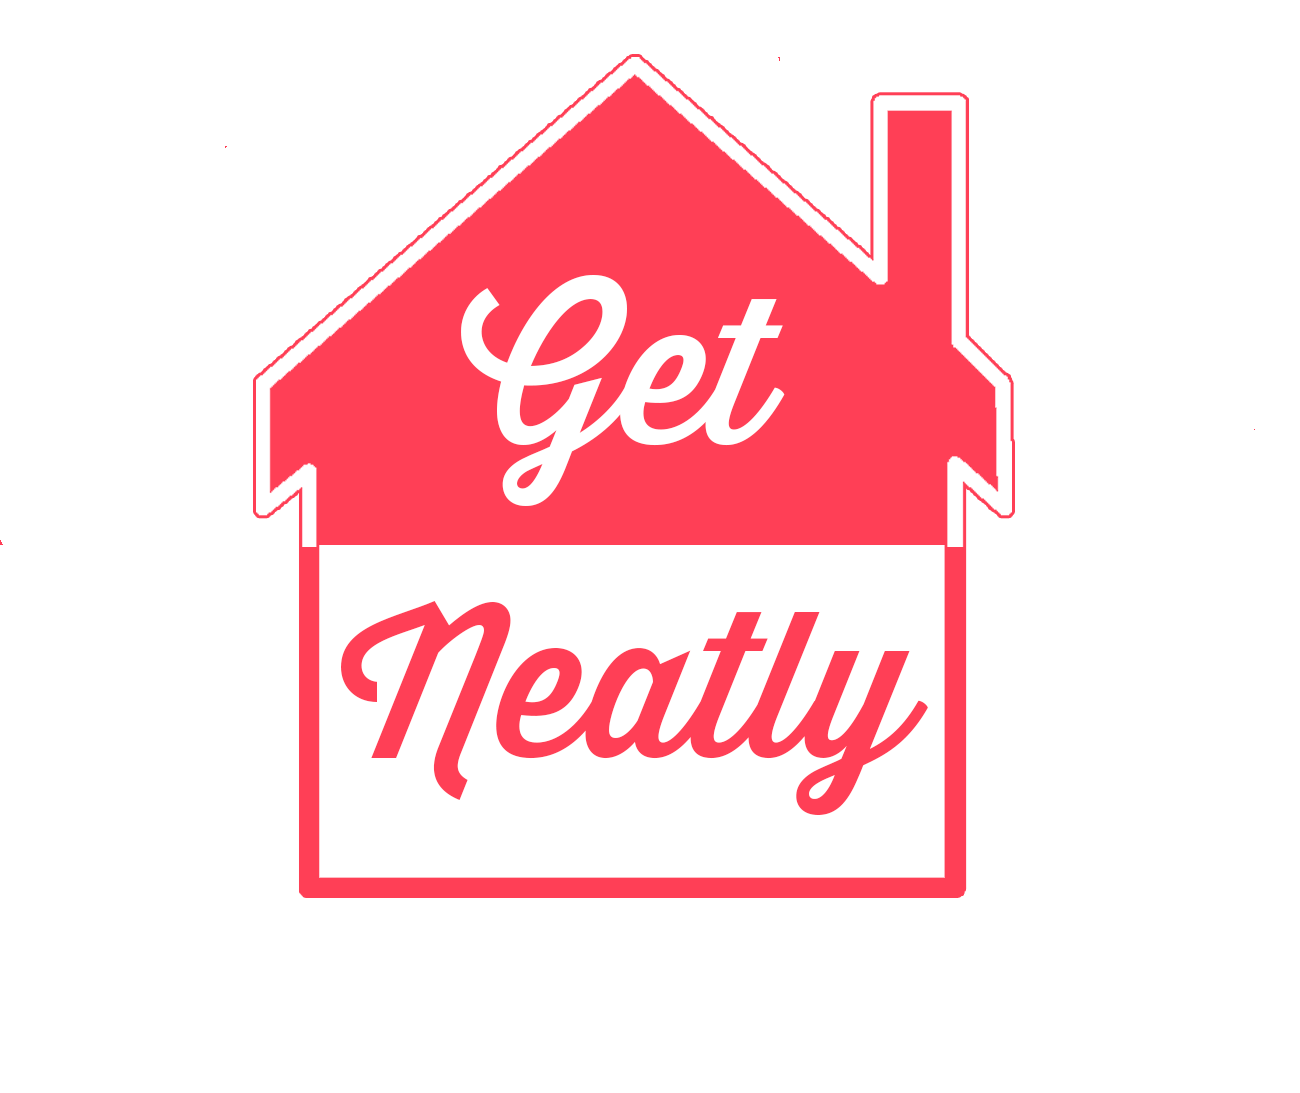 Get Neatly